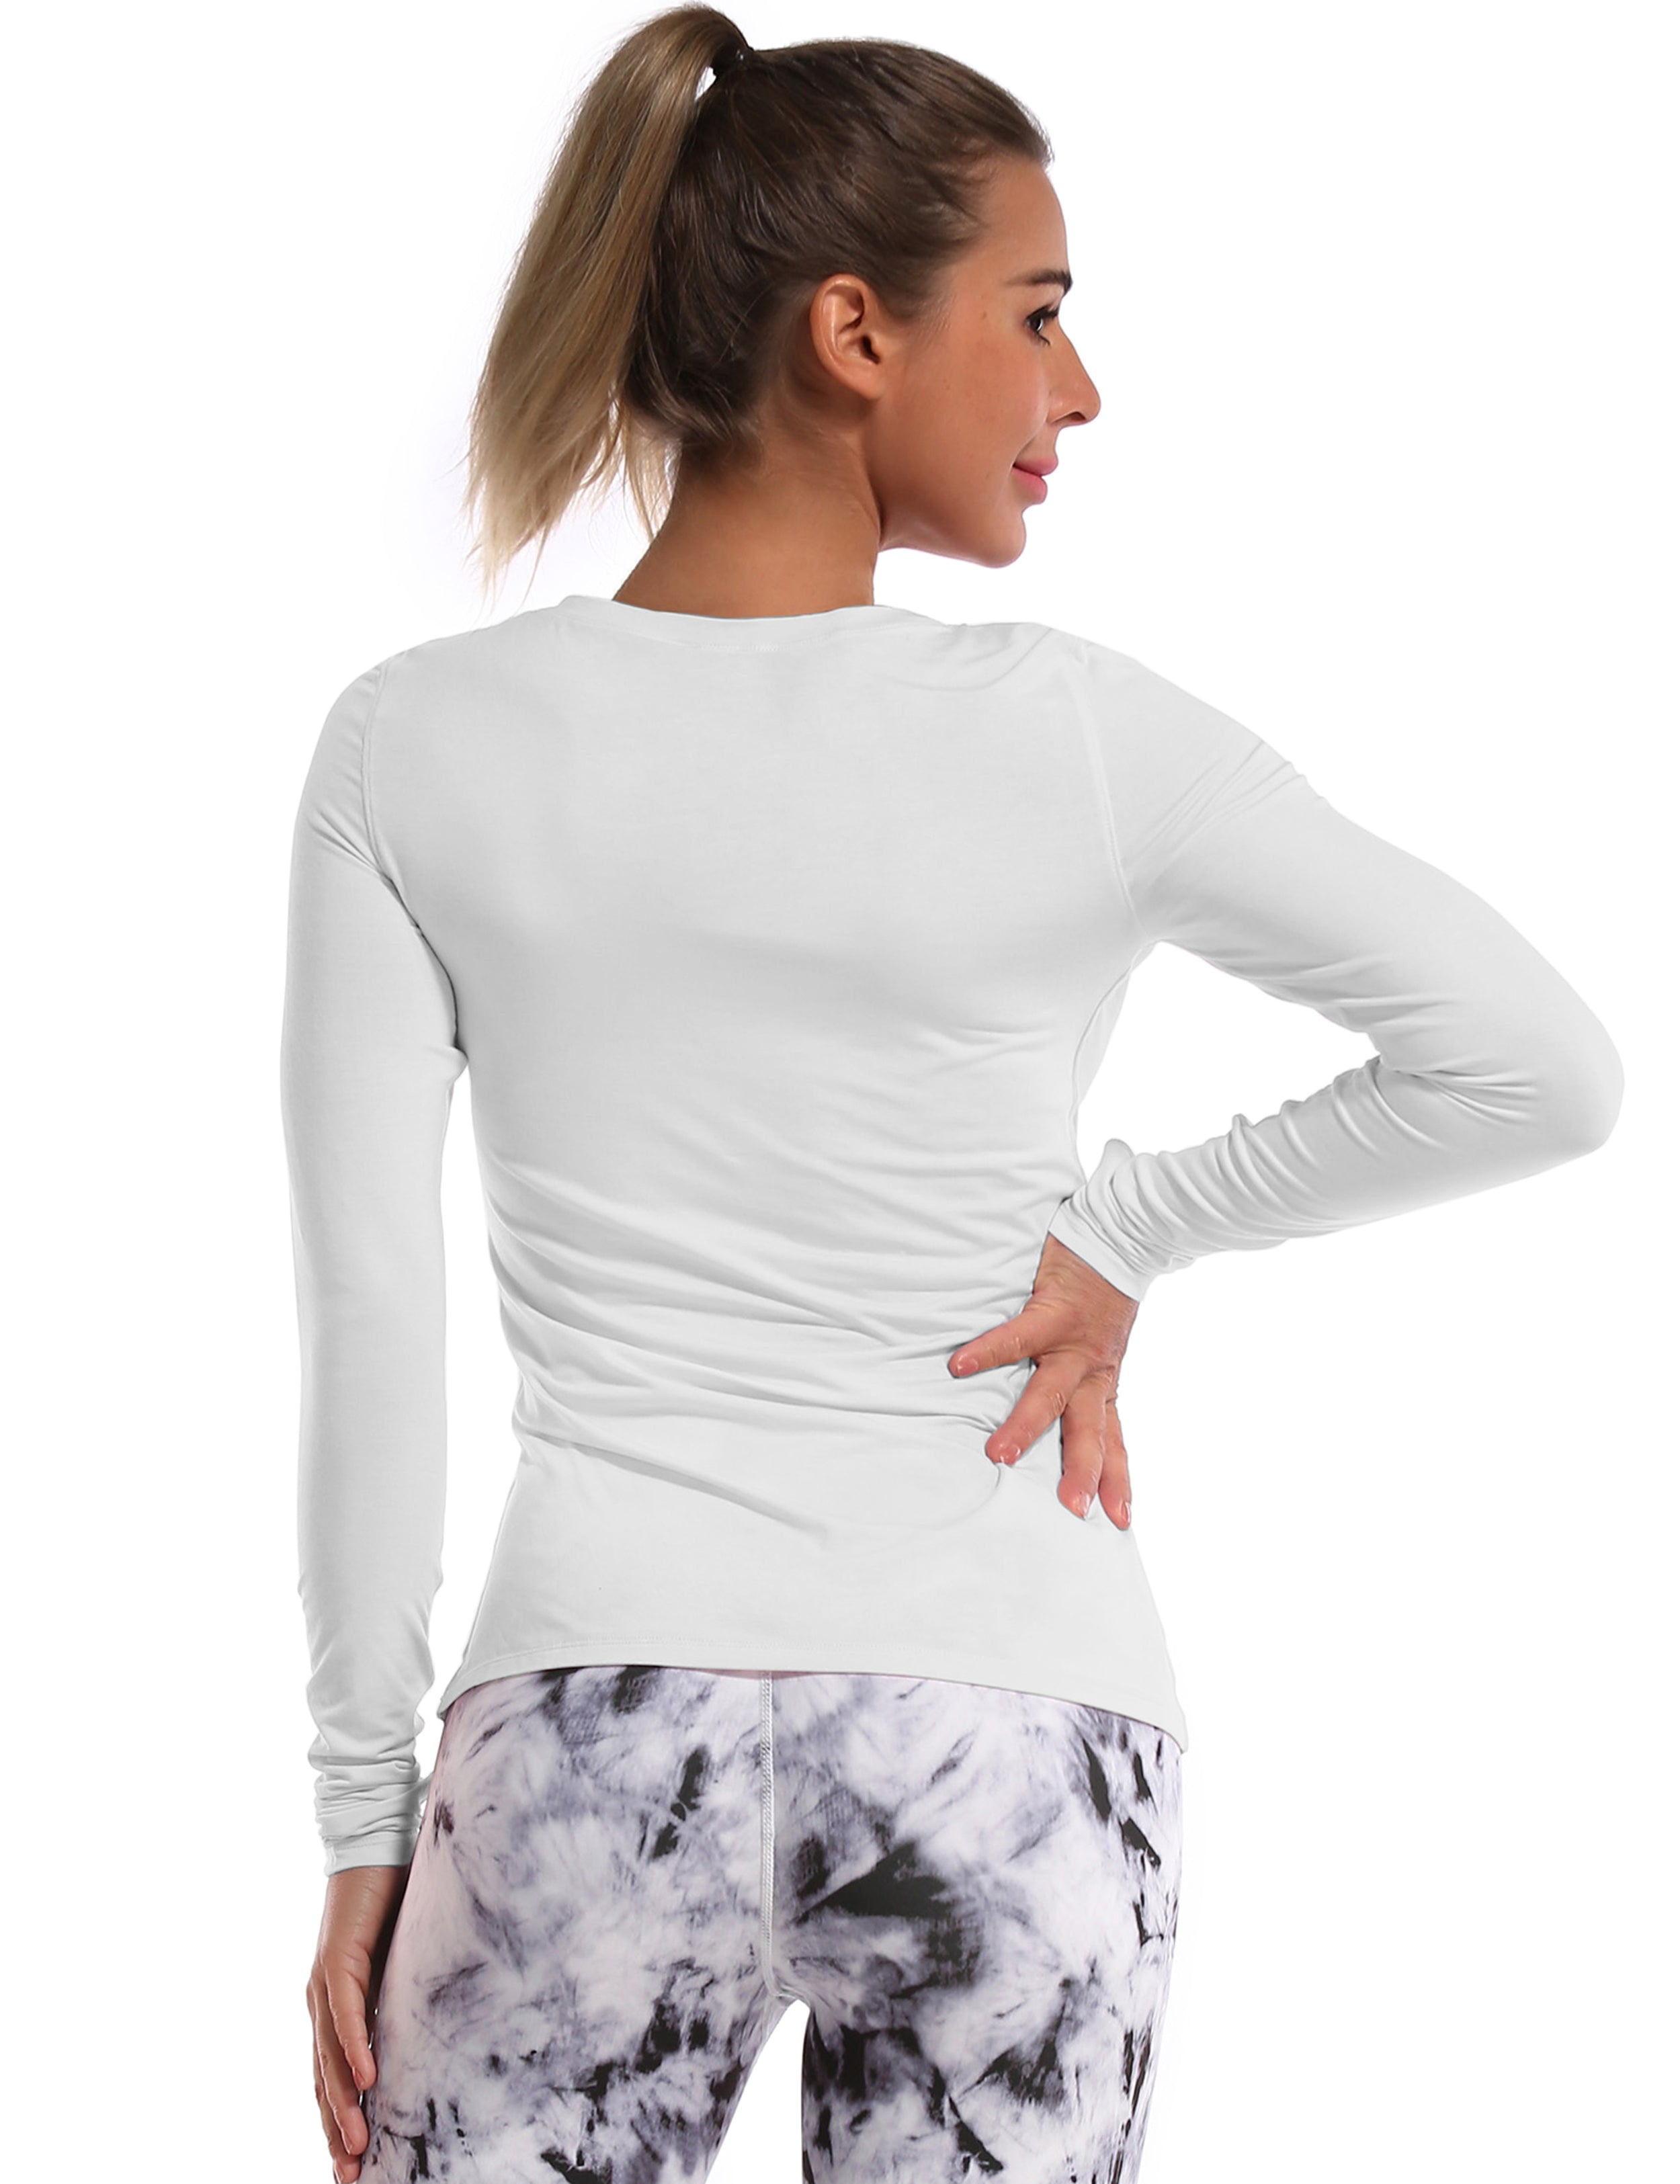 Athlete Long Sleeve Tops lightgray Designed for On the Move Slim fit 93%Modal/7%Spandex Four-way stretch Naturally breathable Super-Soft, Modal Fabric